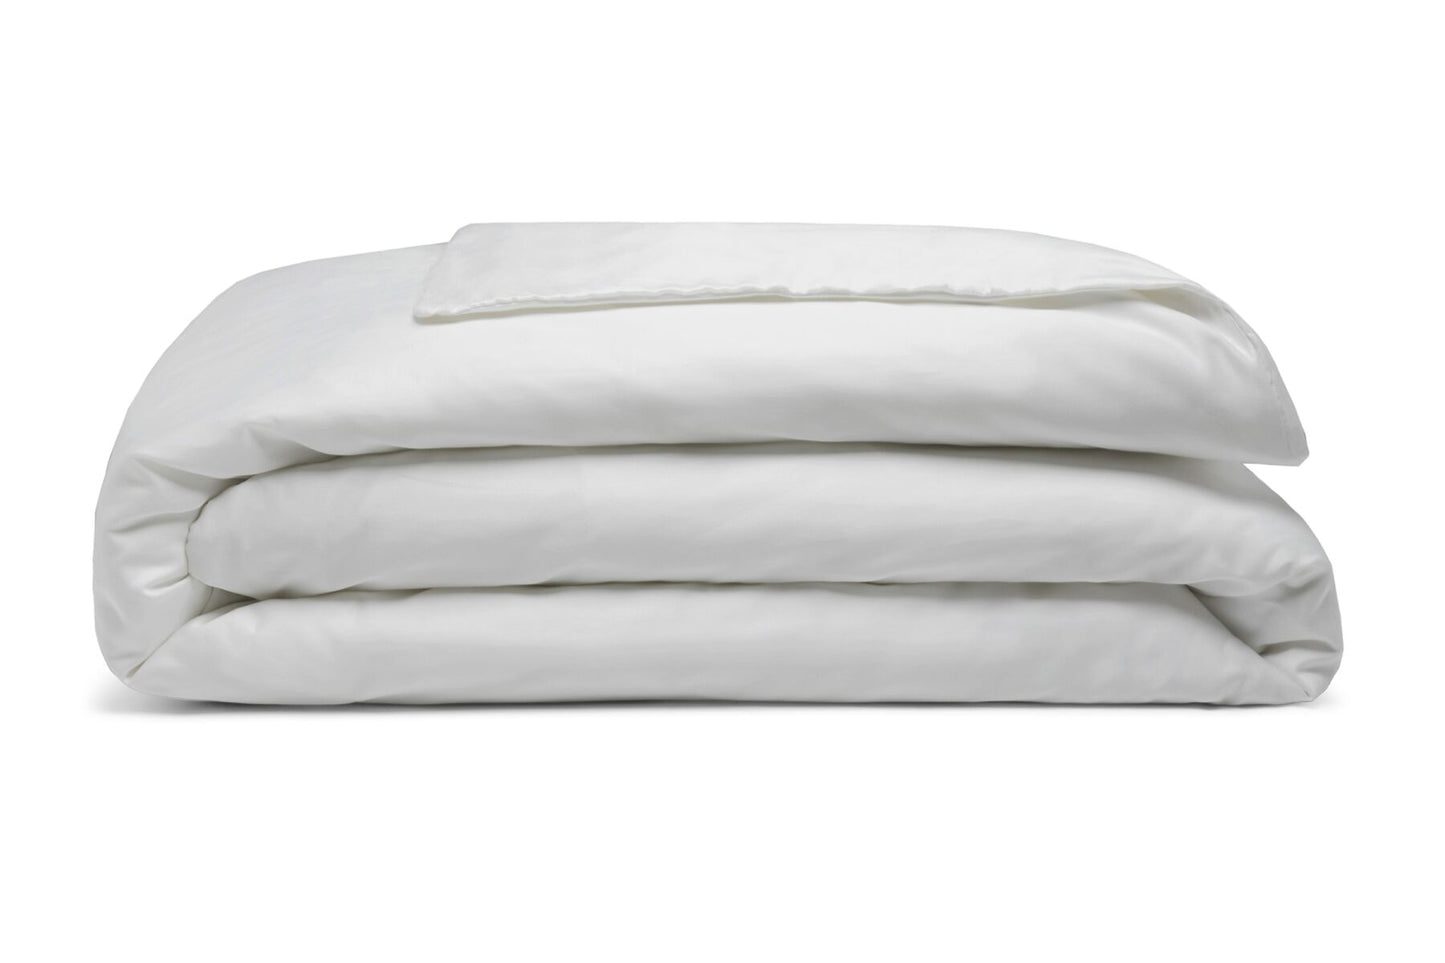 Egyptian Cotton Double Island shape Bedding pack